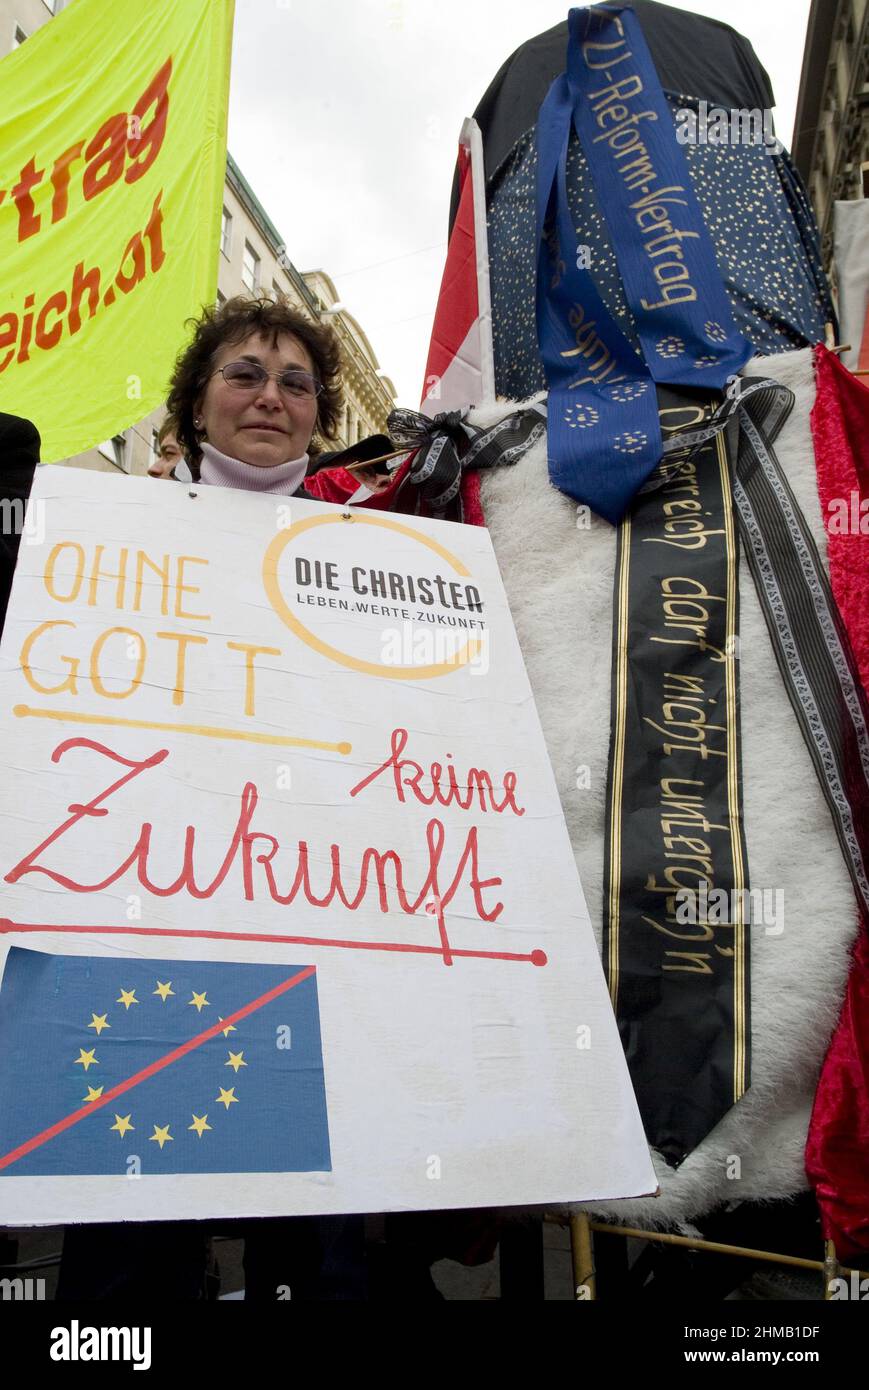 Vienna, Austria. March 23, 2008. Demonstration for referendum against Lisbon Treaty in Vienna. Inscription 'Without God no future' Stock Photo